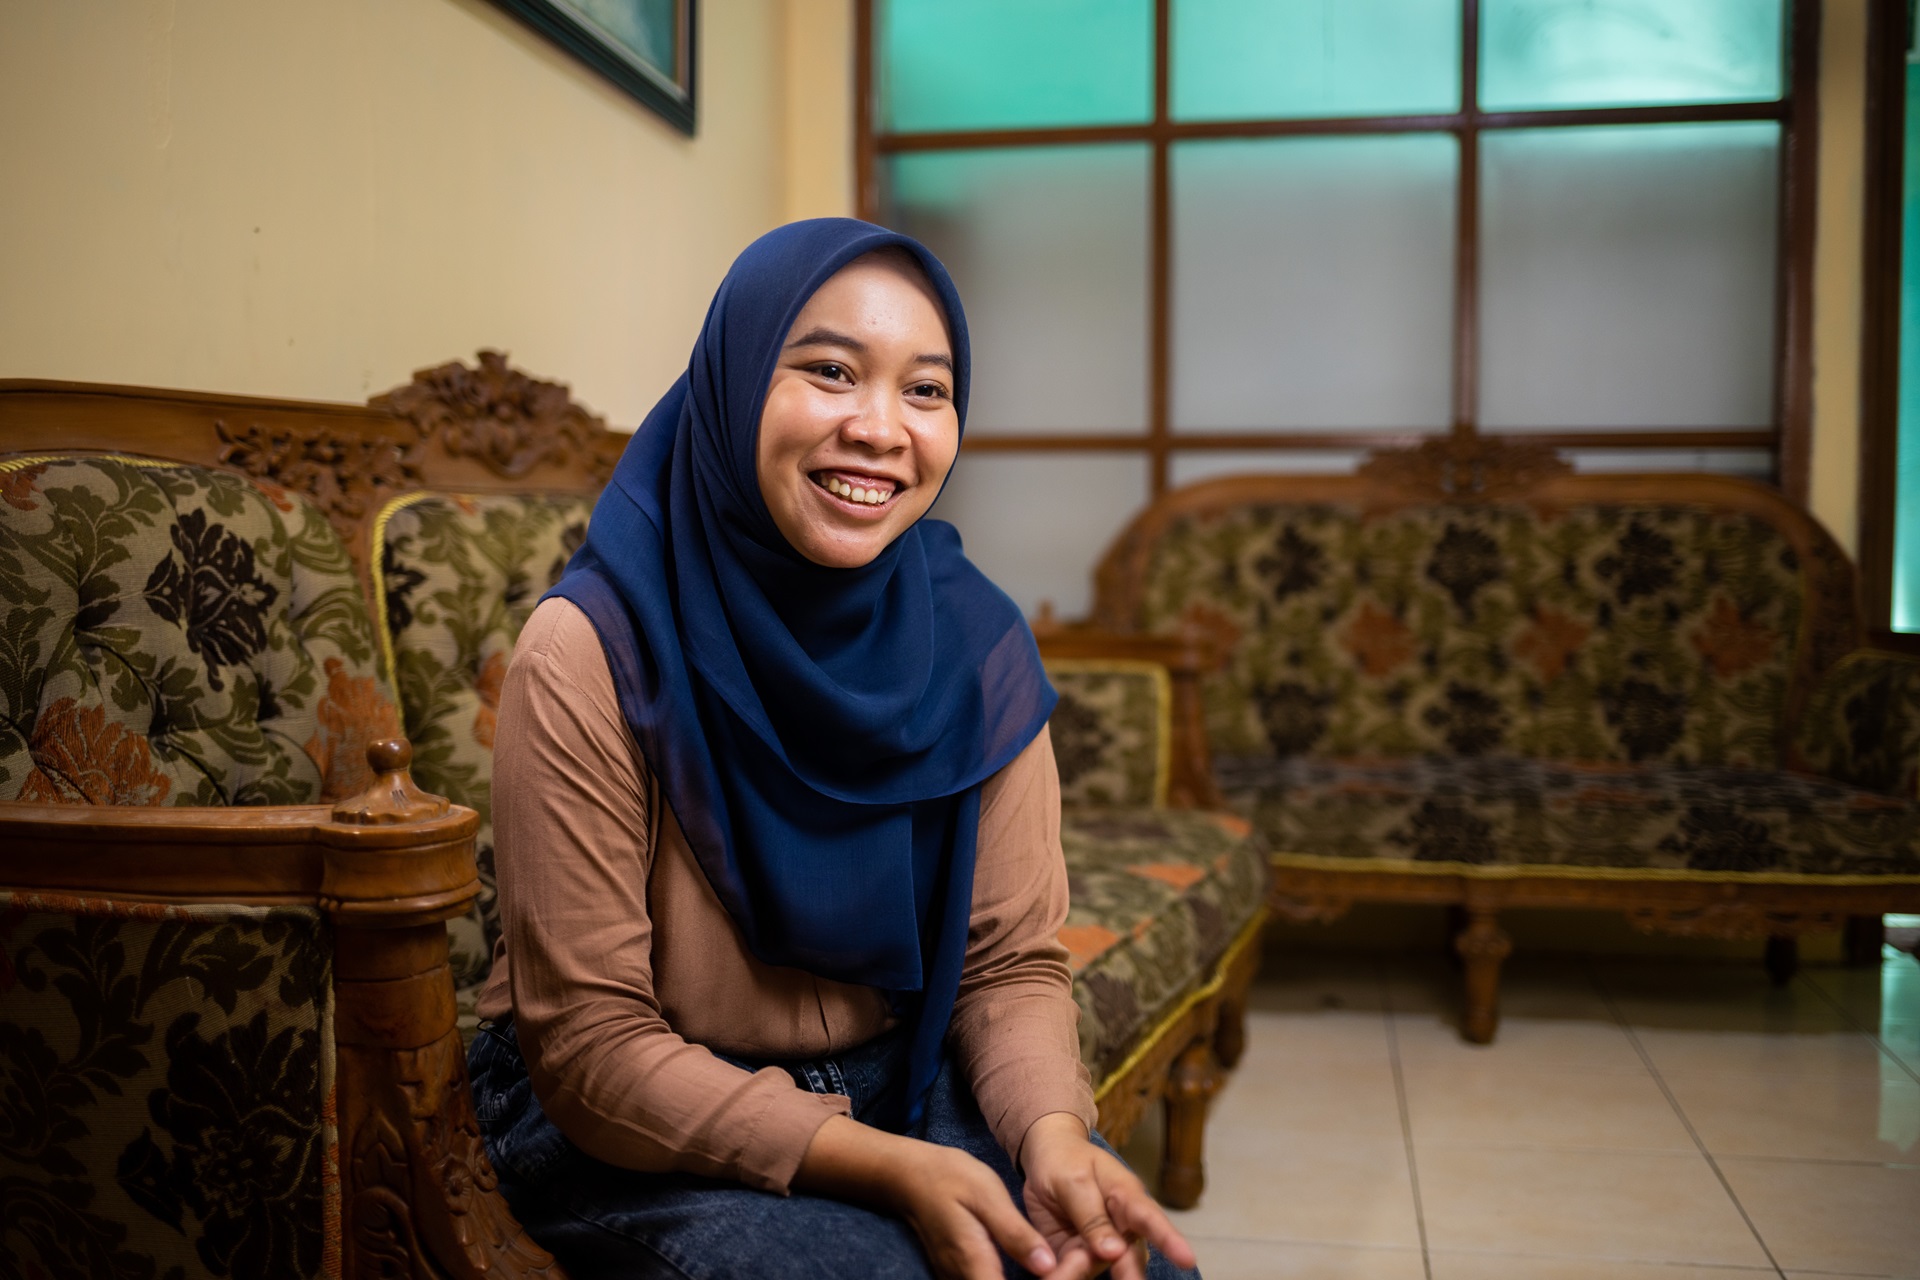 Woman in a headscarf sitting on a couch, smiling